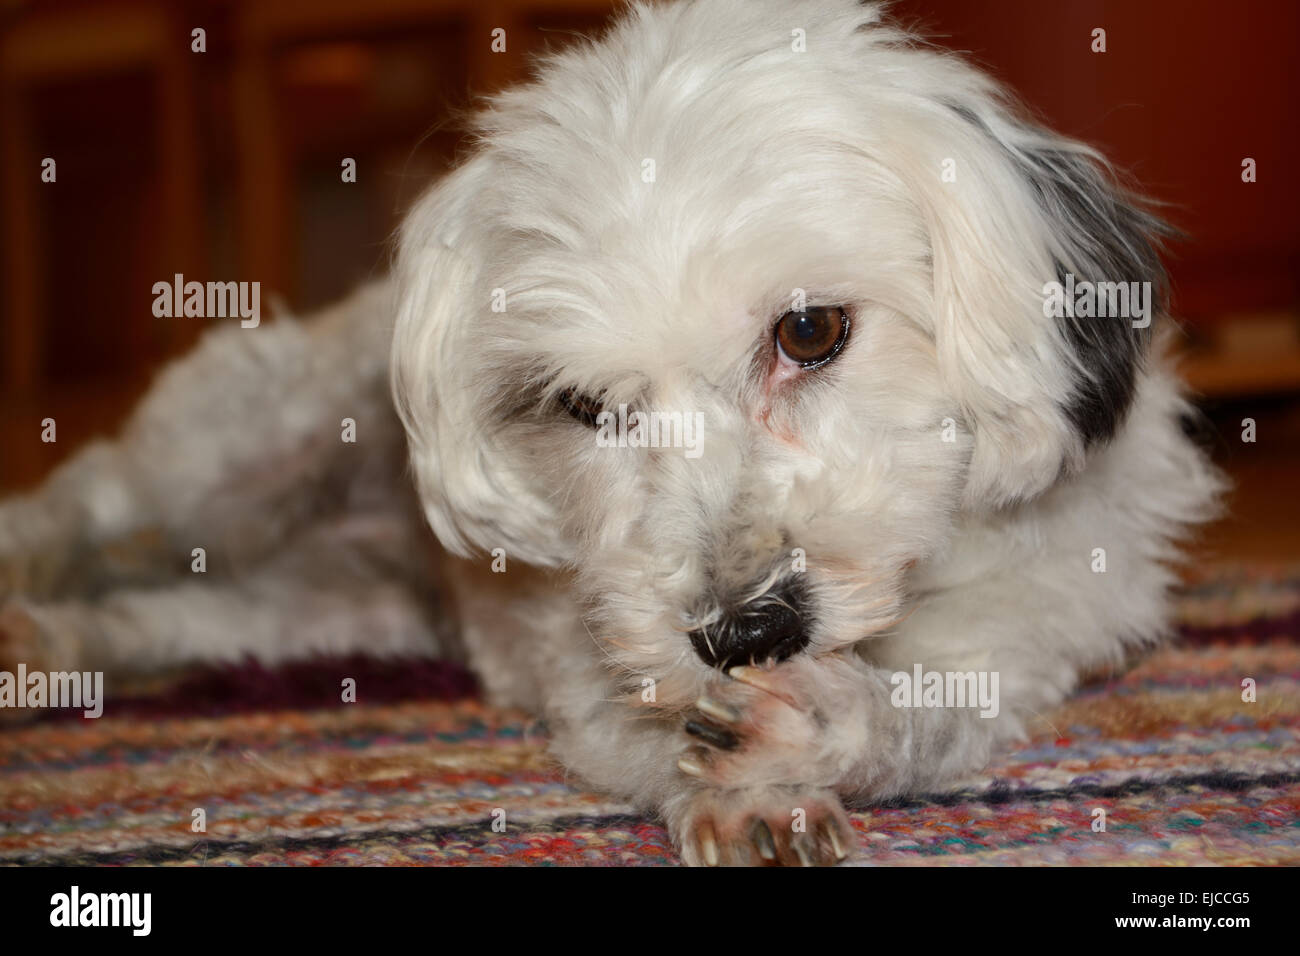 small white dog cleans itself Stock Photo